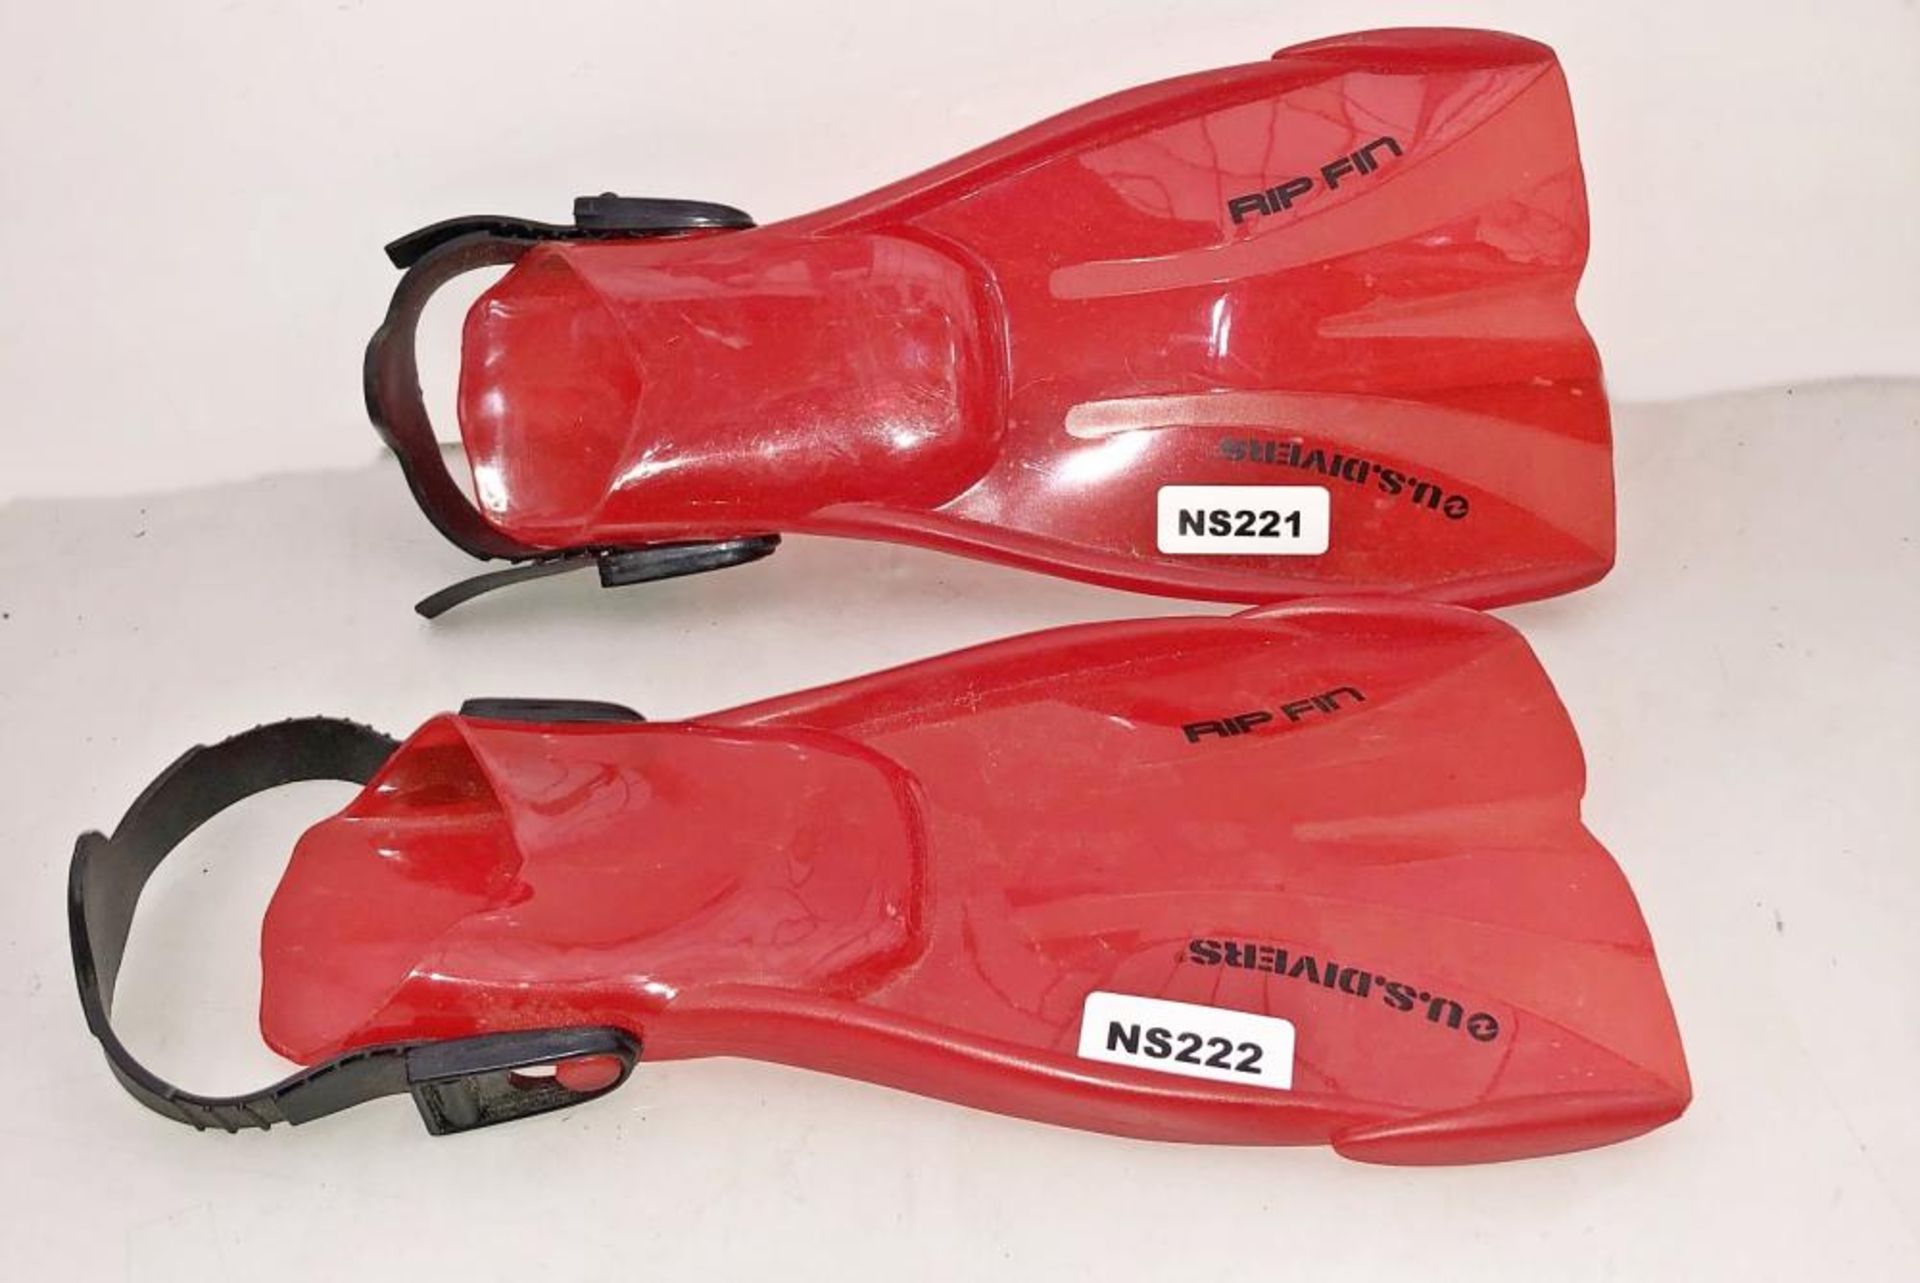 3 x Pairs Of Children's Diving Fins - CL349 - Location: Altrincham WA14 - Image 8 of 9